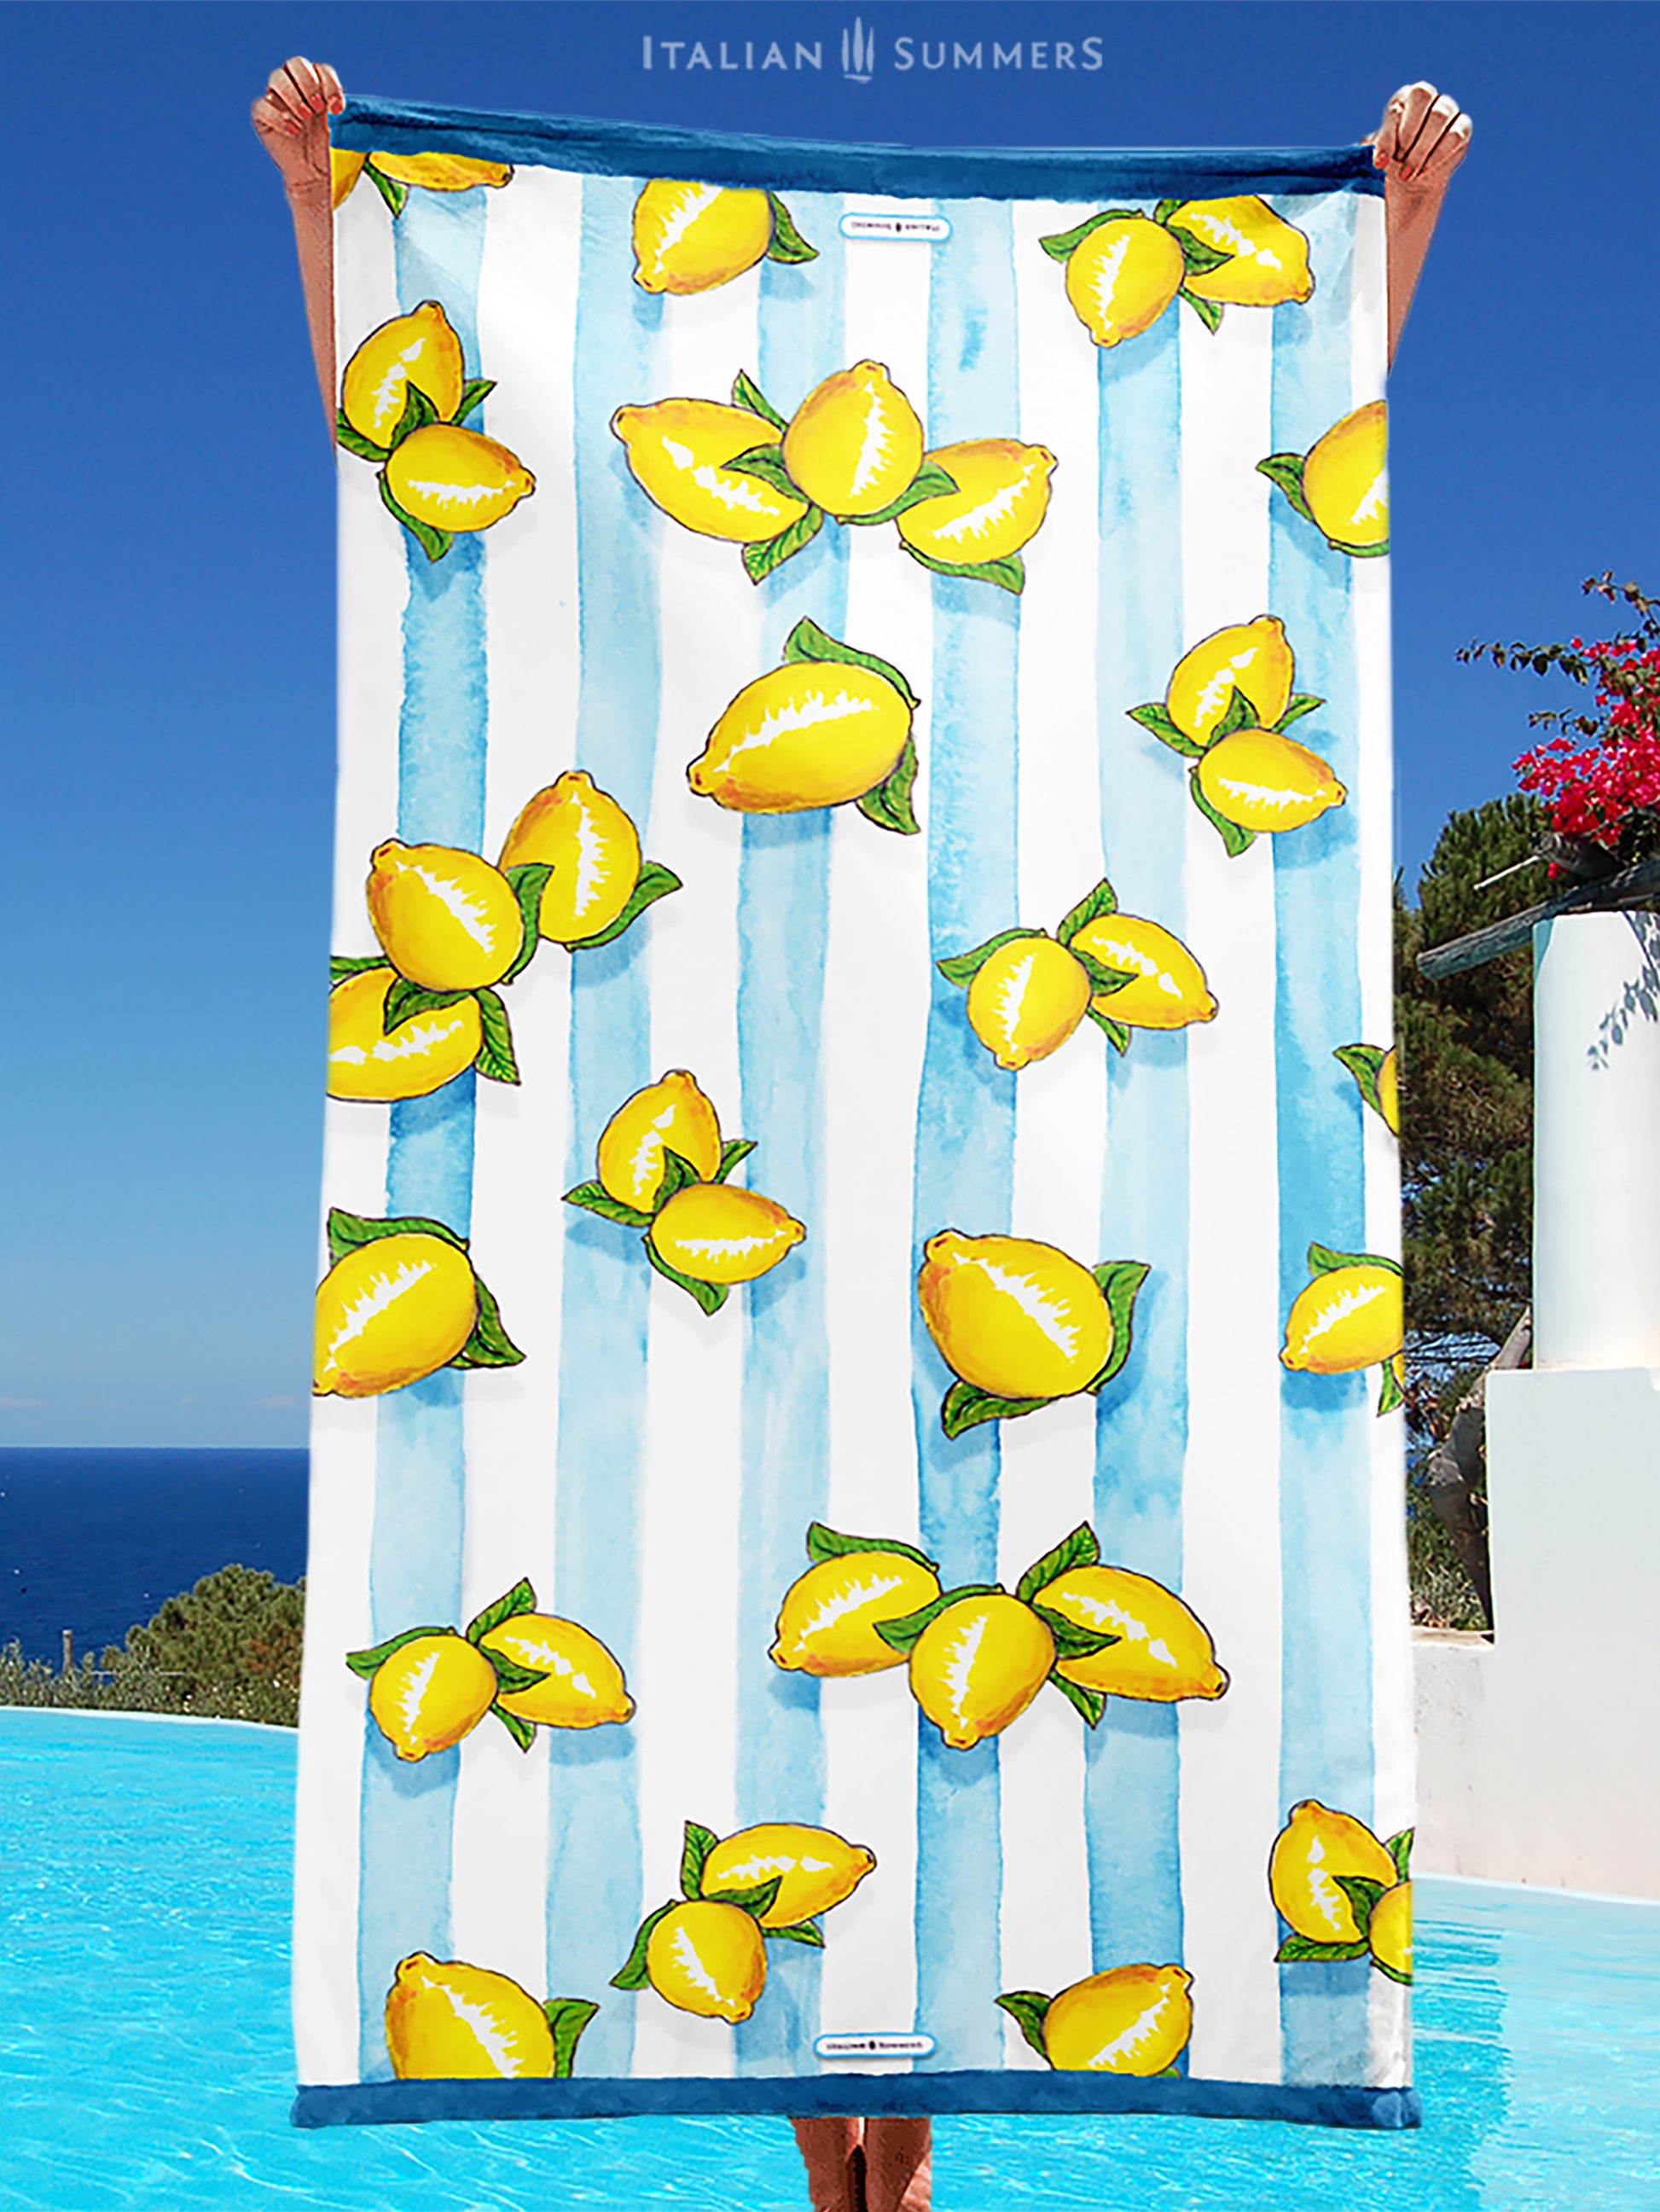 A large beach towel with printed Sorrento lemons on a background of aqua blue water color stripes. A happy and sunny Italian summer feeling. Made by Italian Summers